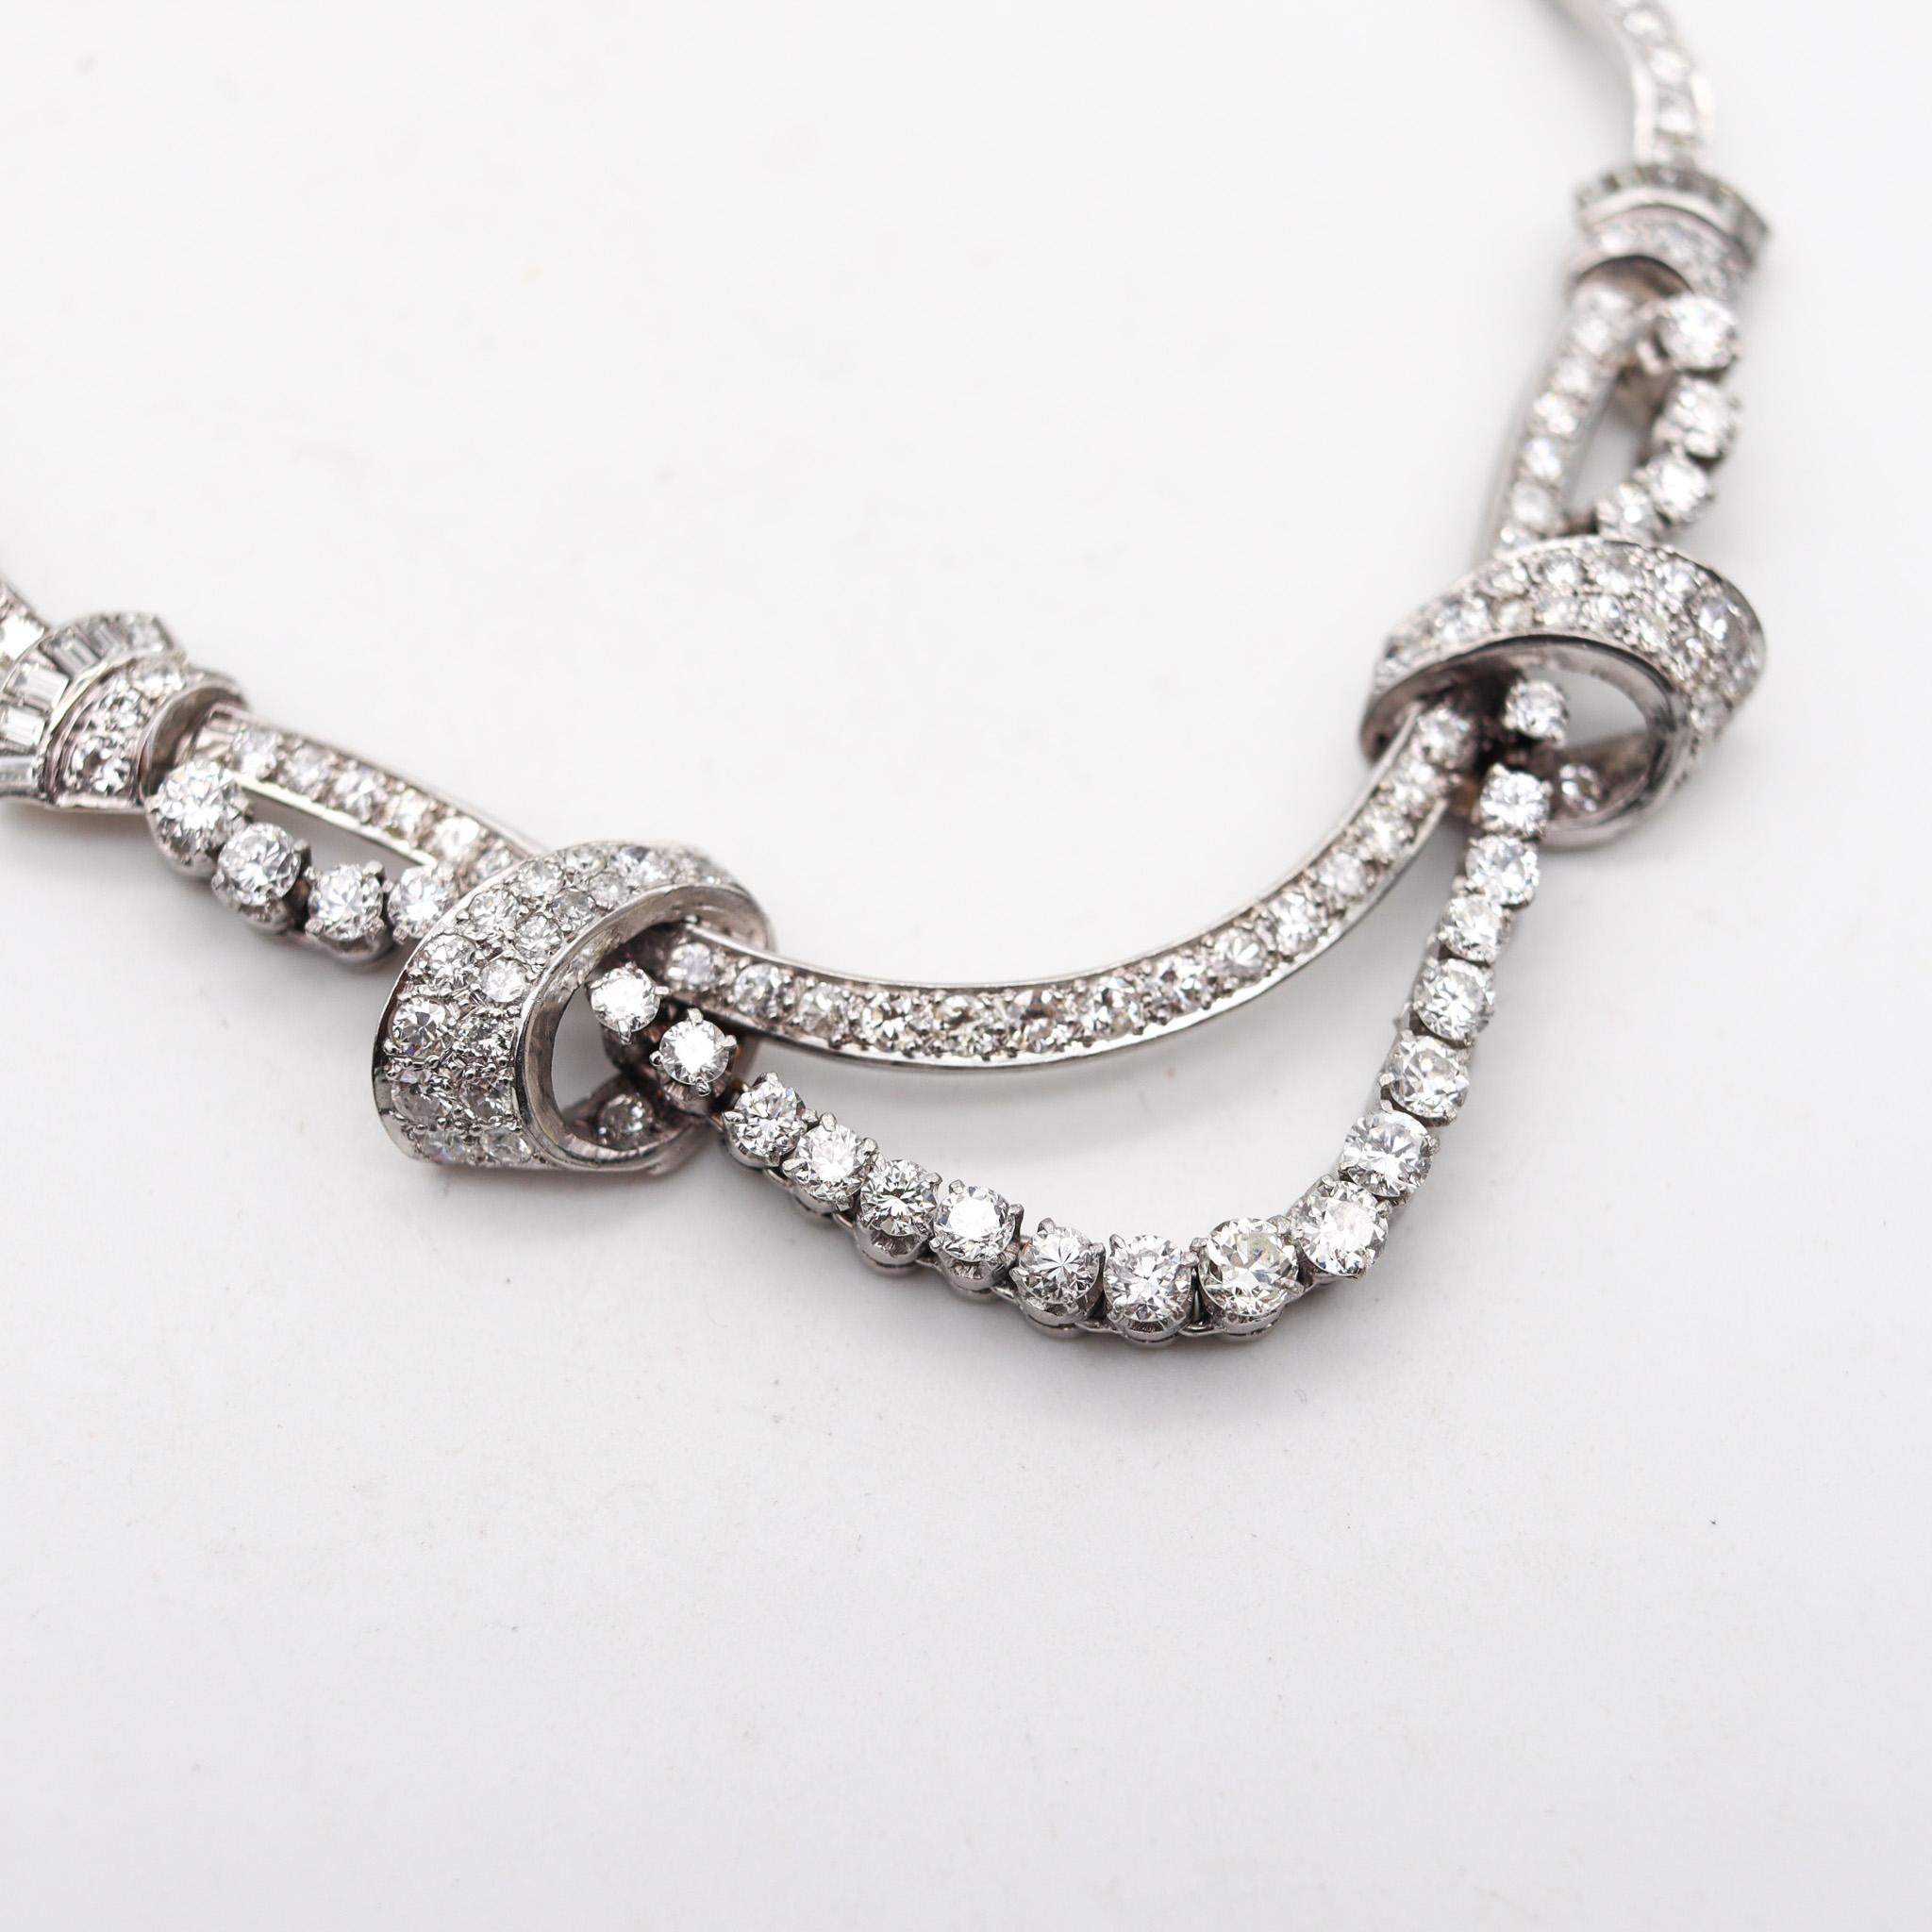 Art Deco 1935 American Garlands Necklace In Platinum With 12.68 Ctw In Diamonds For Sale 4